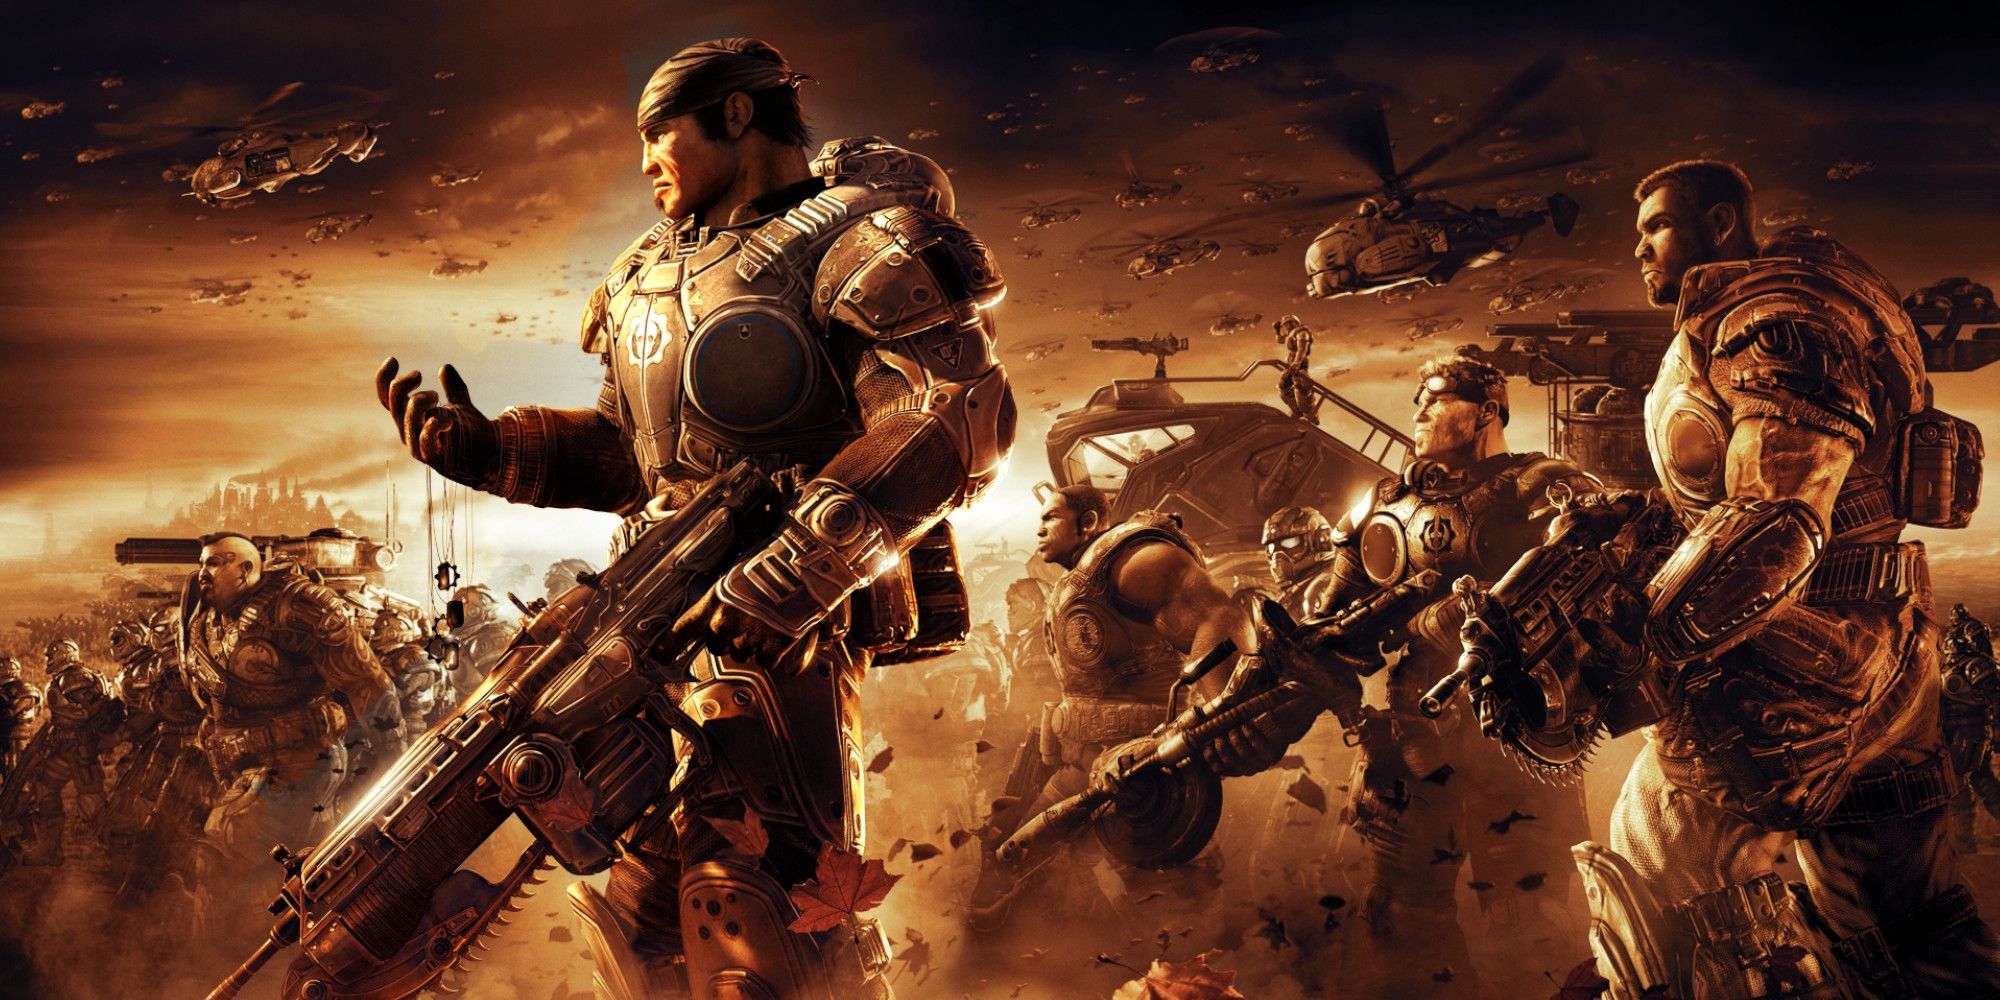 Marcus Fenix and Co. prepare for a huge battle against the Locust